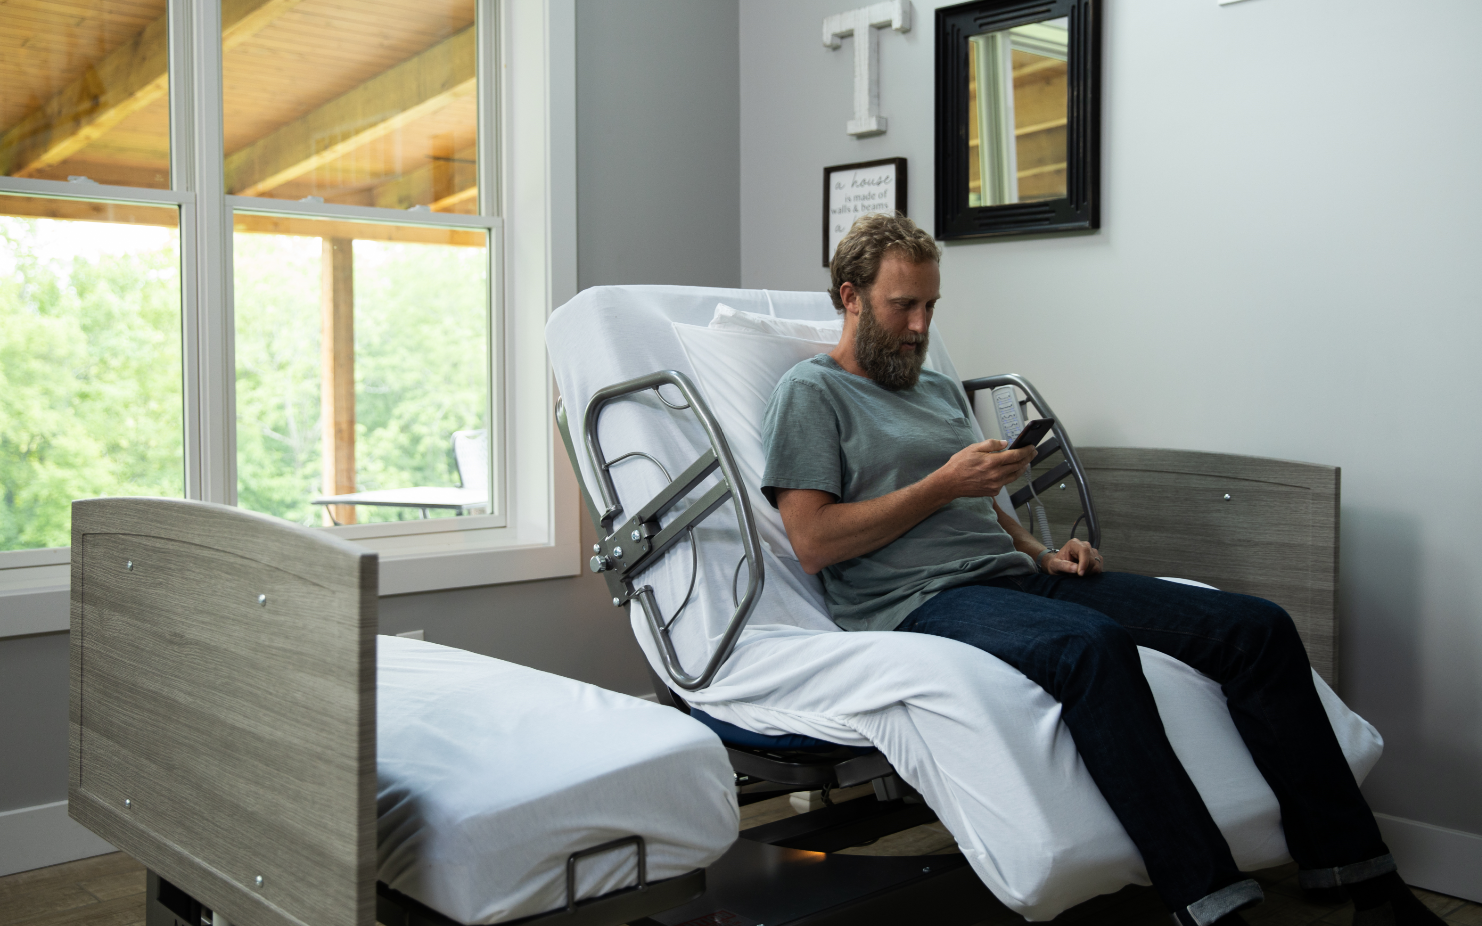 Image of man sitting in ActiveCare hospital bed and using his phone.